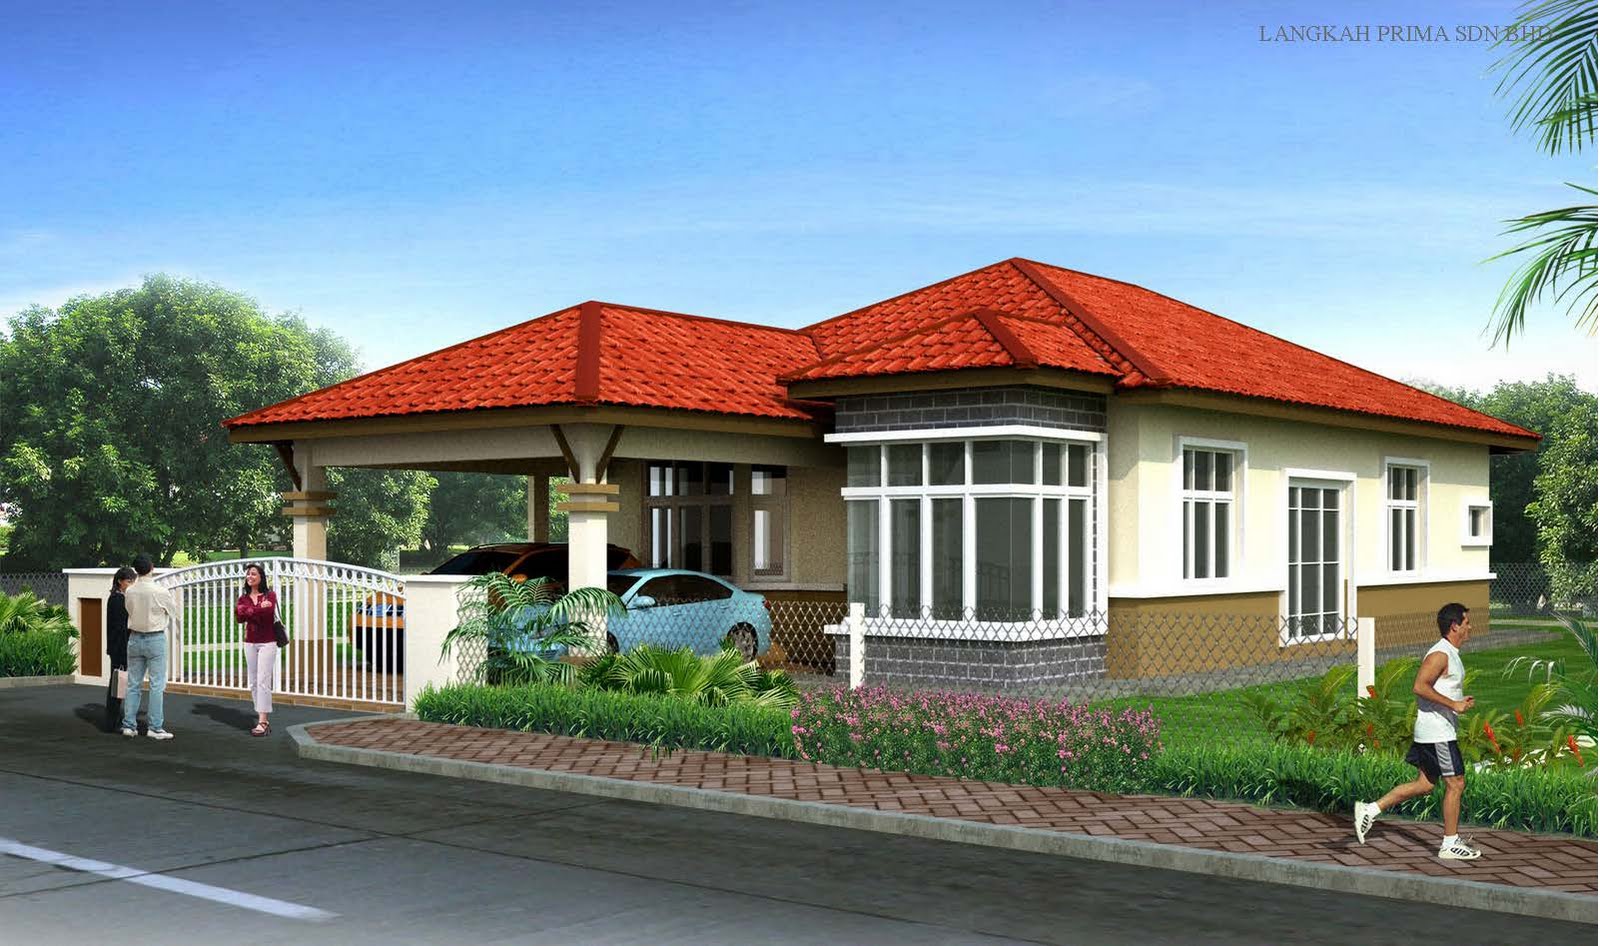 Langkah Prima Sdn Bhd (679420-x): Project